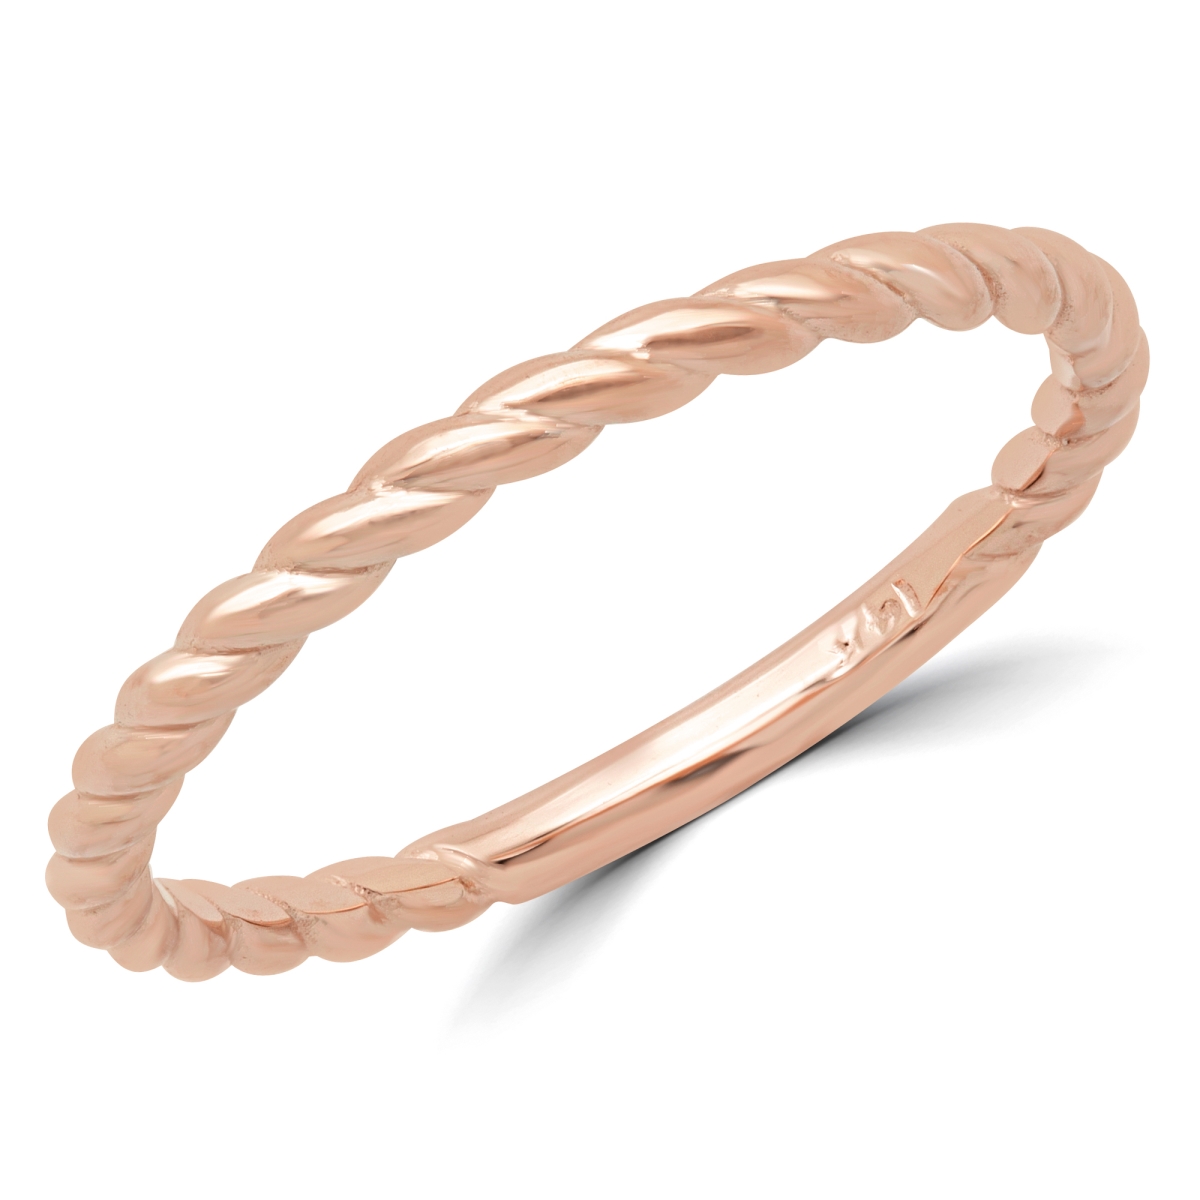 Picture of Majesty Diamonds MD180603-5.25 Braided Rope Classic Wedding Band Ring in 14K Rose Gold - Size 5.25